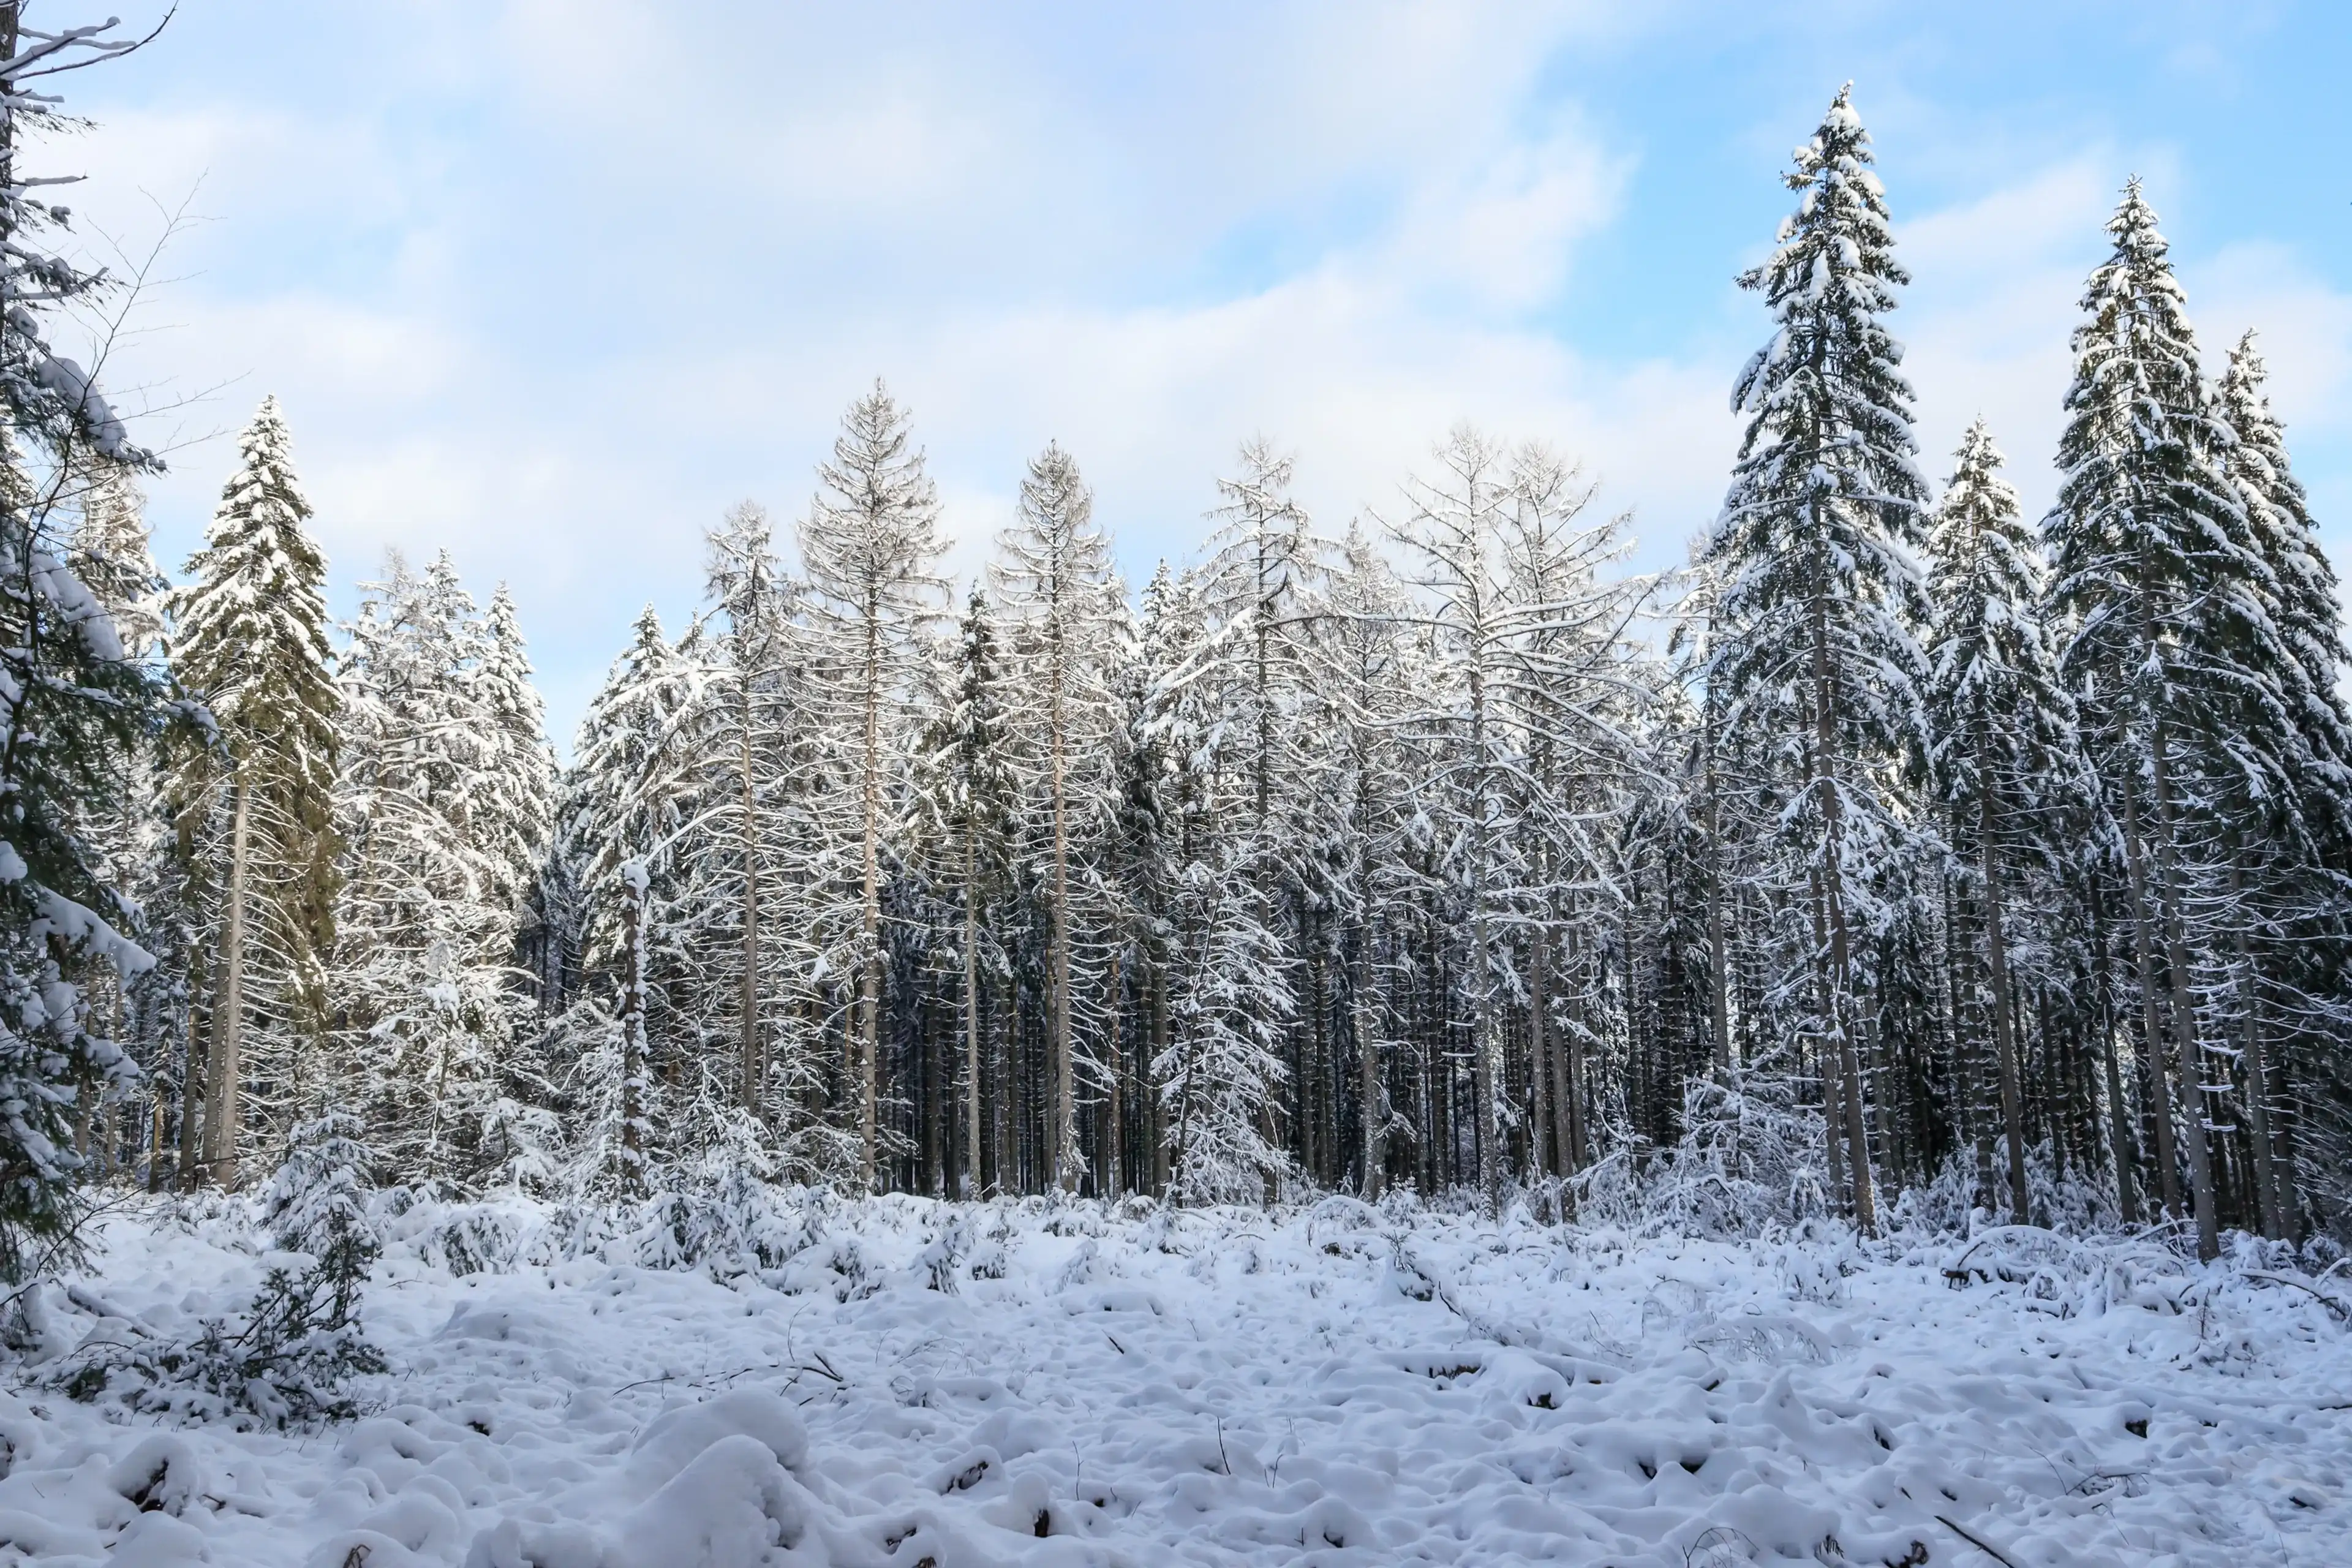 Snow covered fir trees in the forest in an open area, bottom view, close-up.